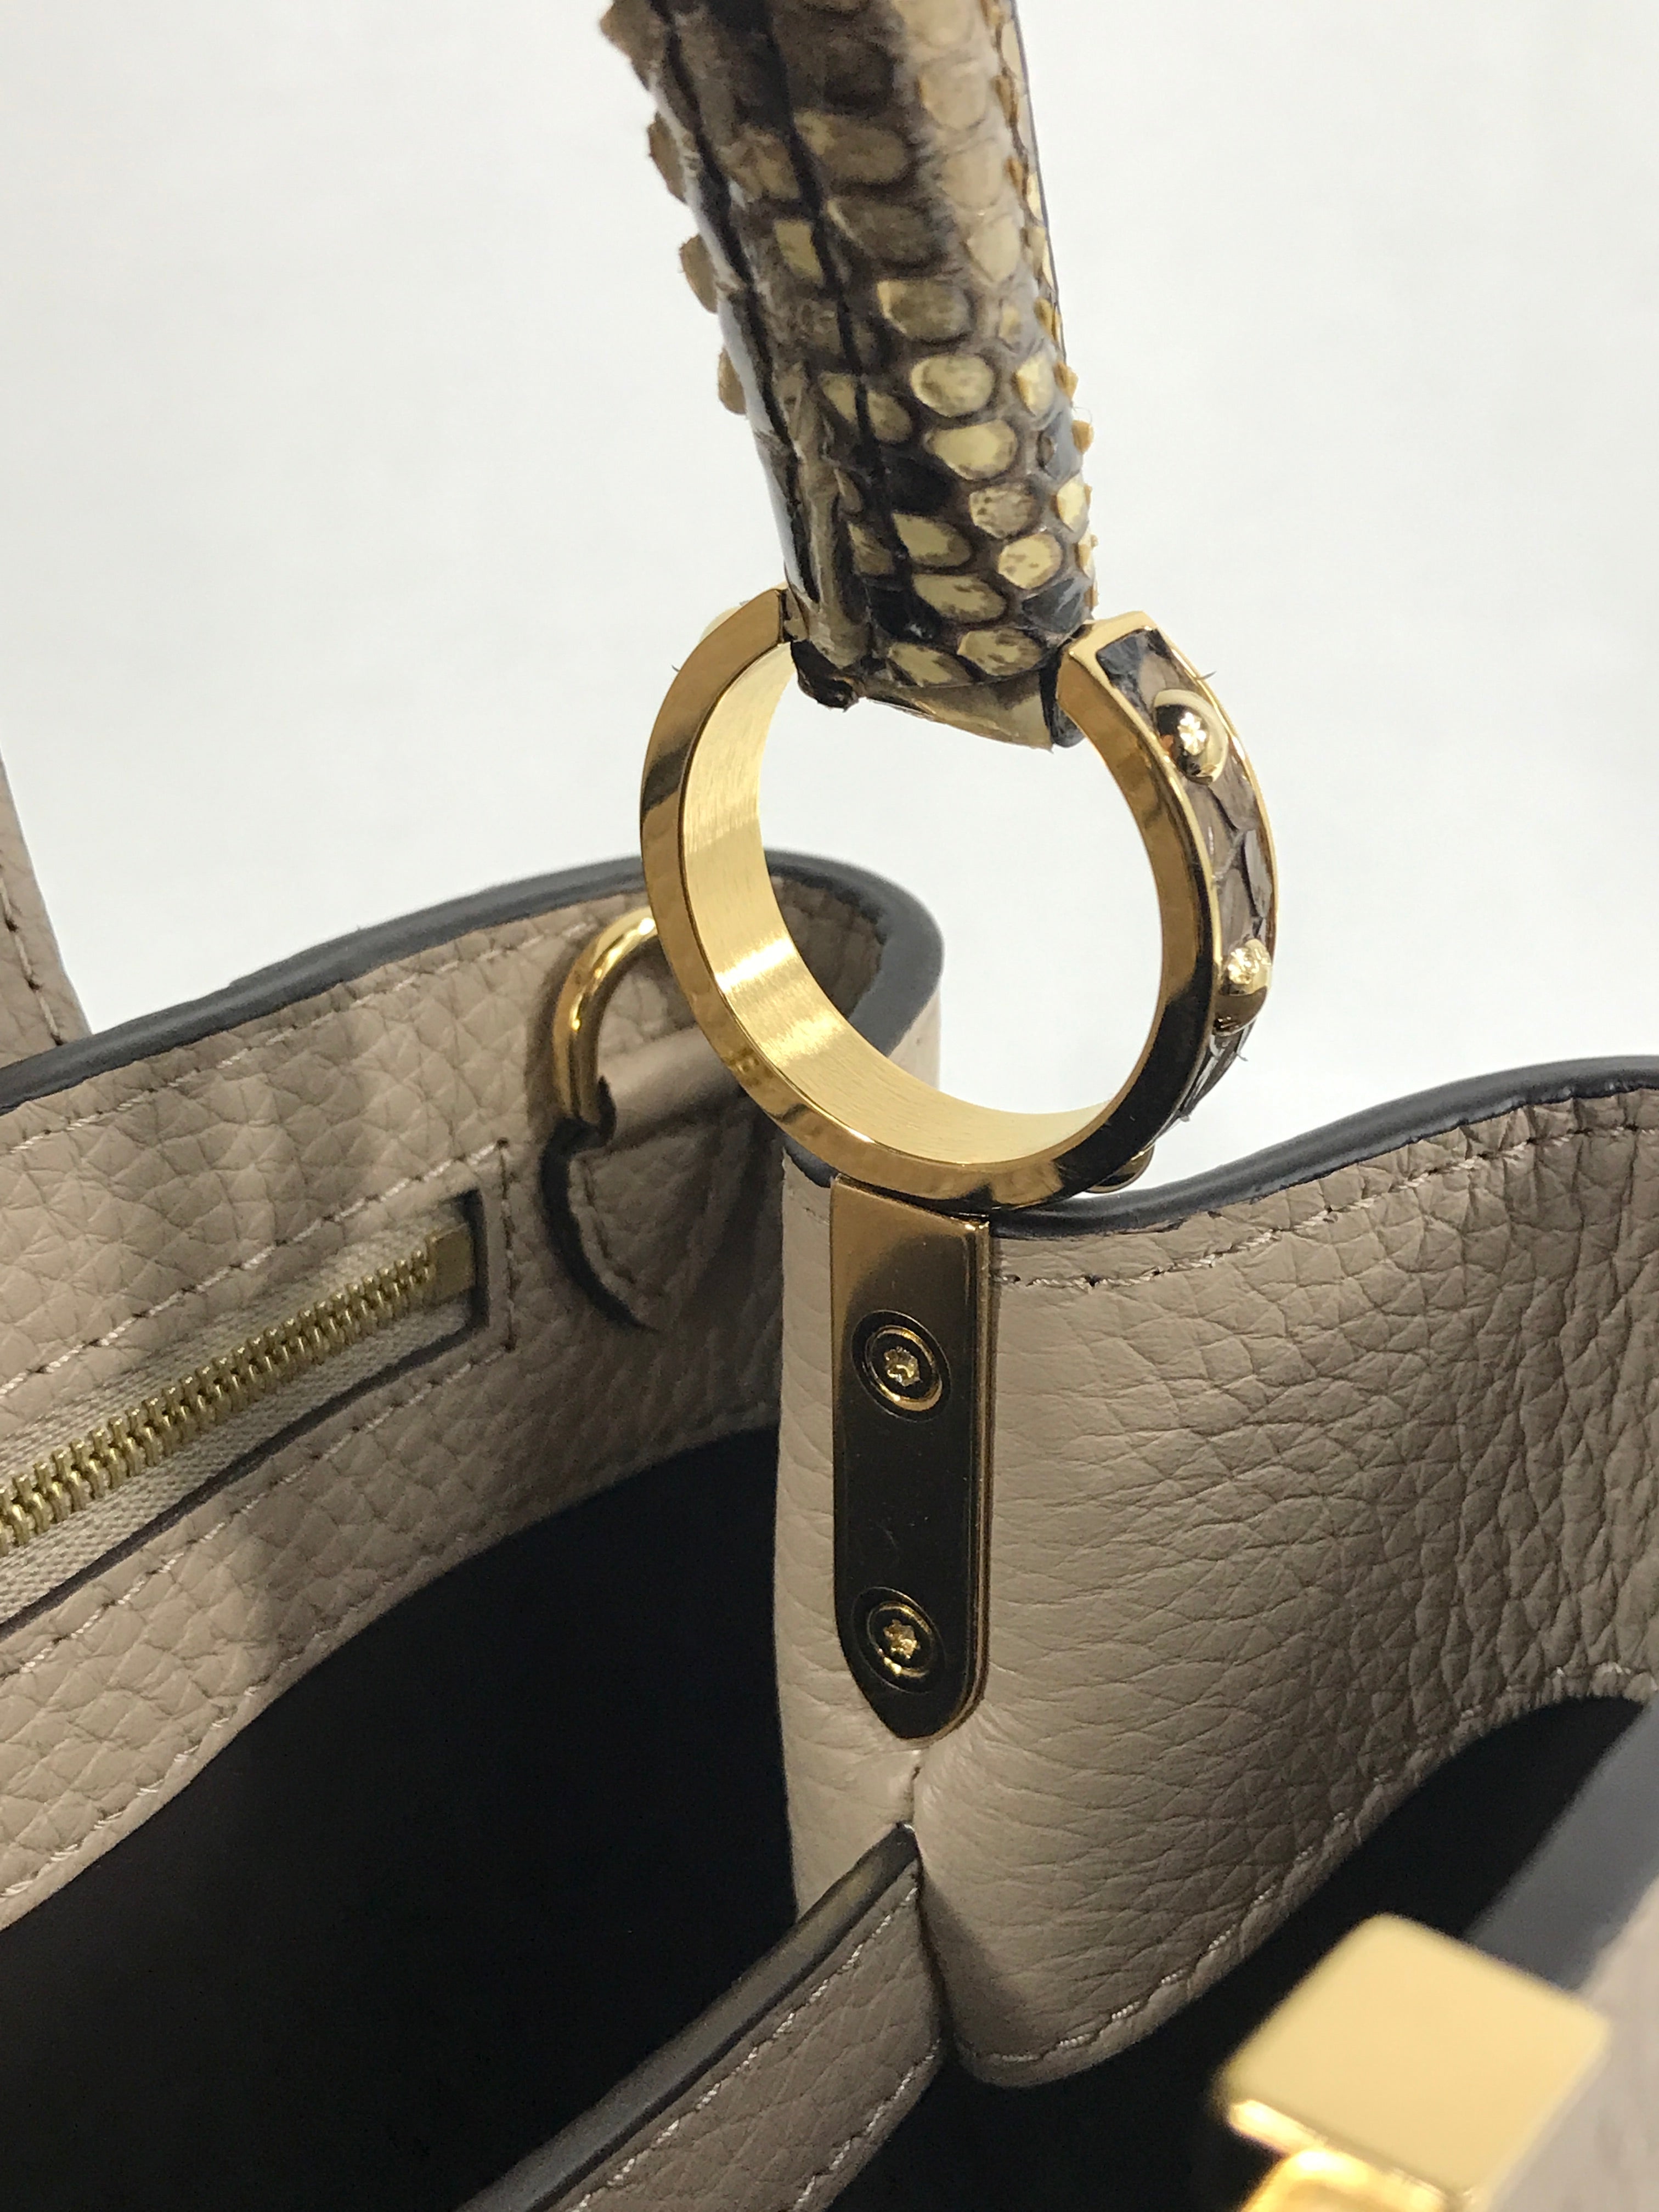 Nude Taurillon Leather Capucines BB Bag w/Python Handle and GHW